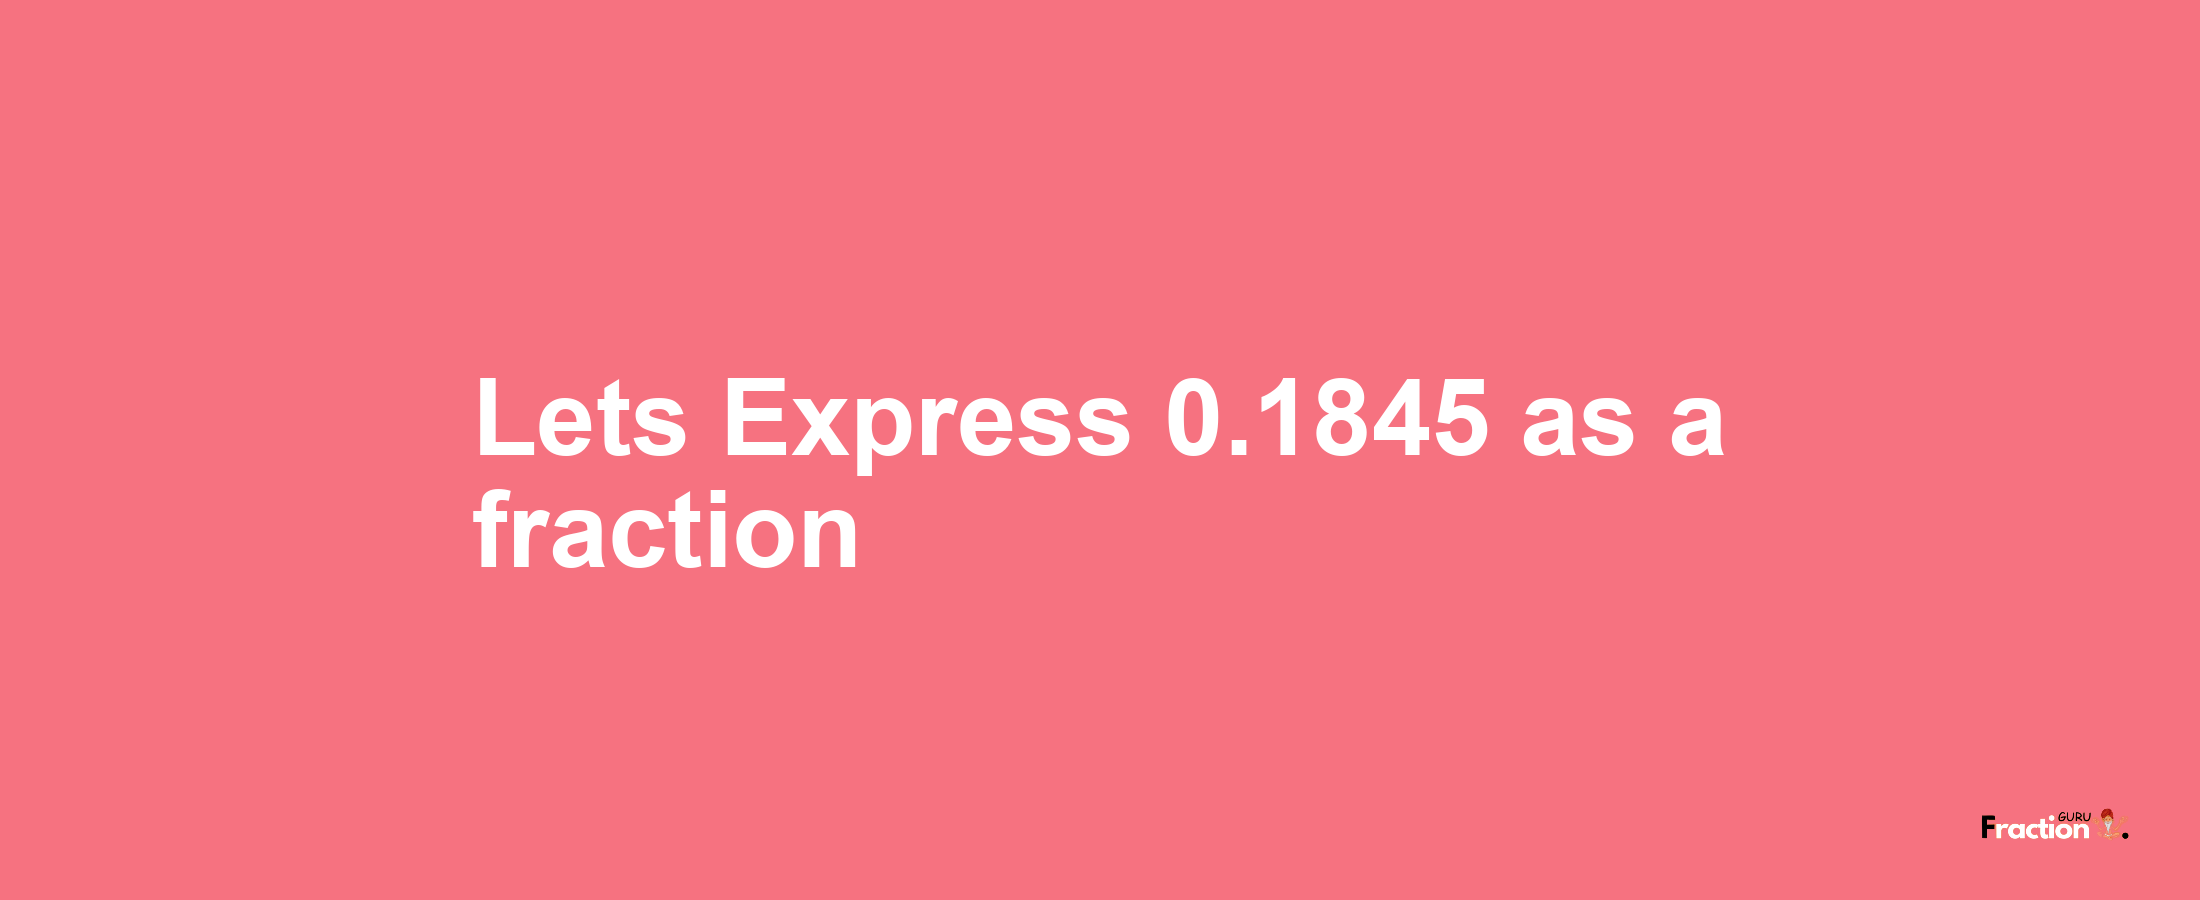 Lets Express 0.1845 as afraction